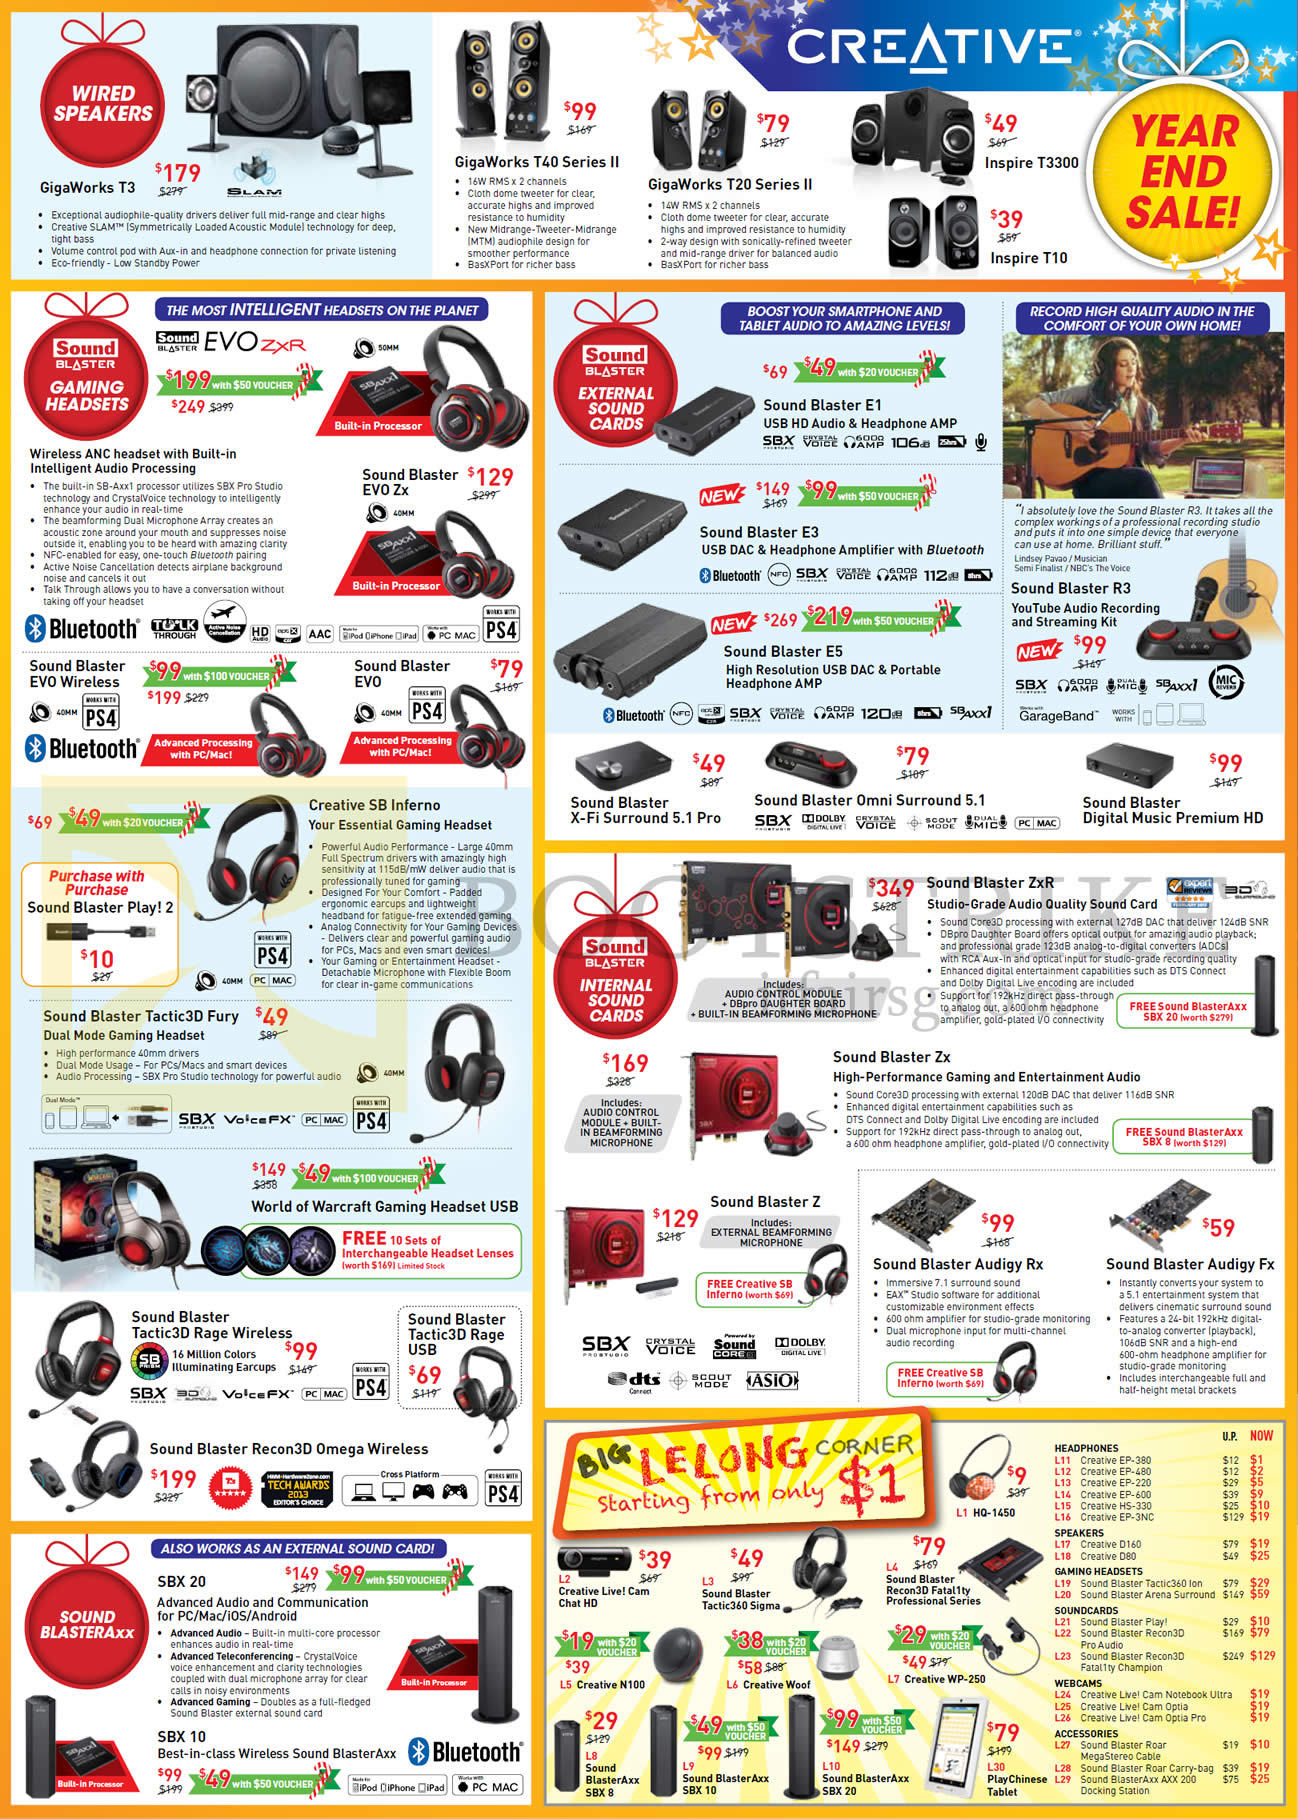 SITEX 2014 price list image brochure of Creative Wired Speakers, Gaming Headsets, Sound Blasteraxx, Internal, External Sound Cards, Lelong Corner Items From 1 Dollar